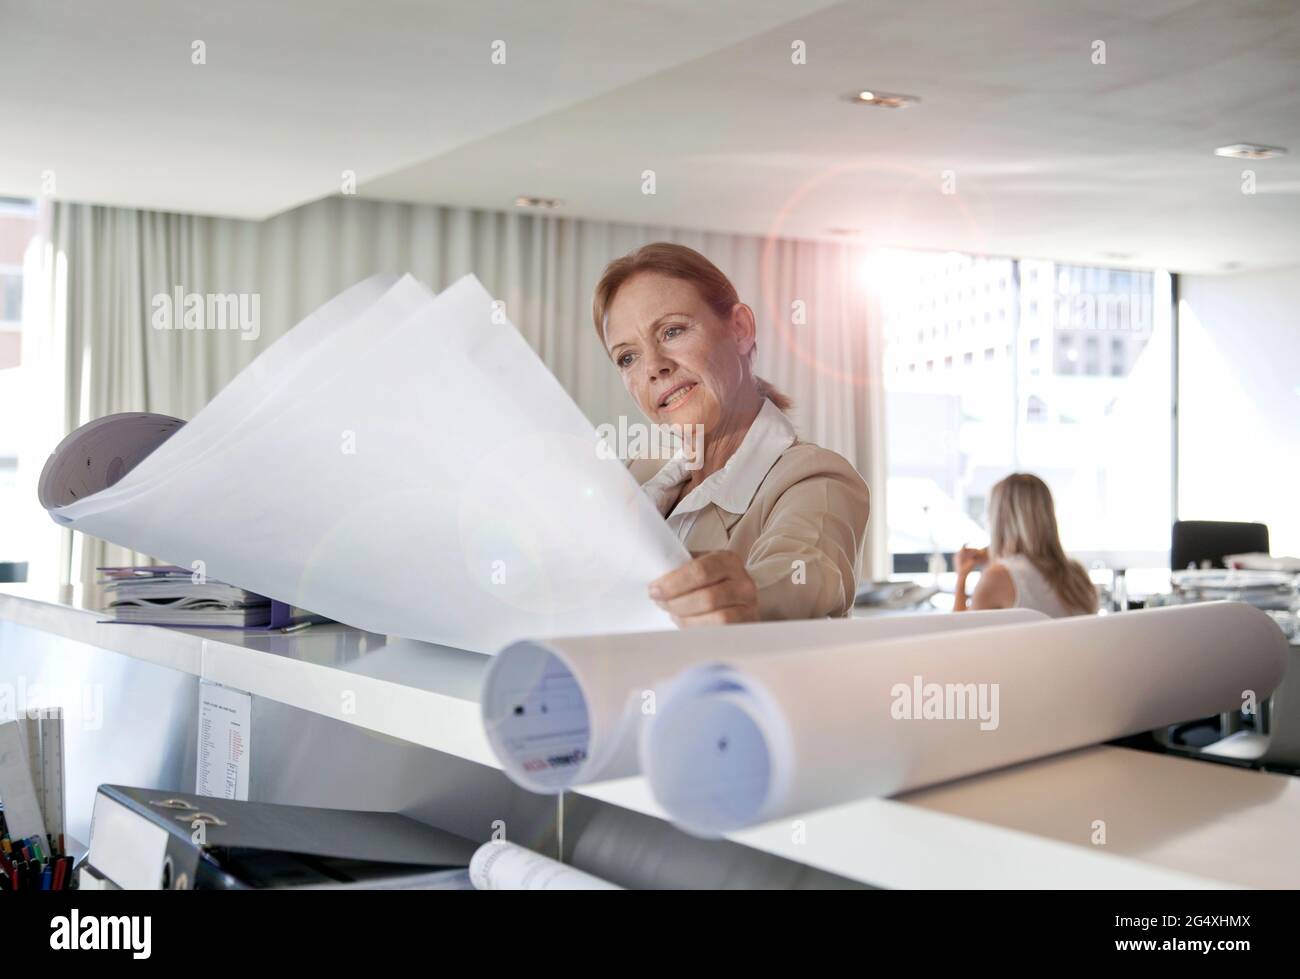 Businesswoman looking at blueprints in office Banque D'Images